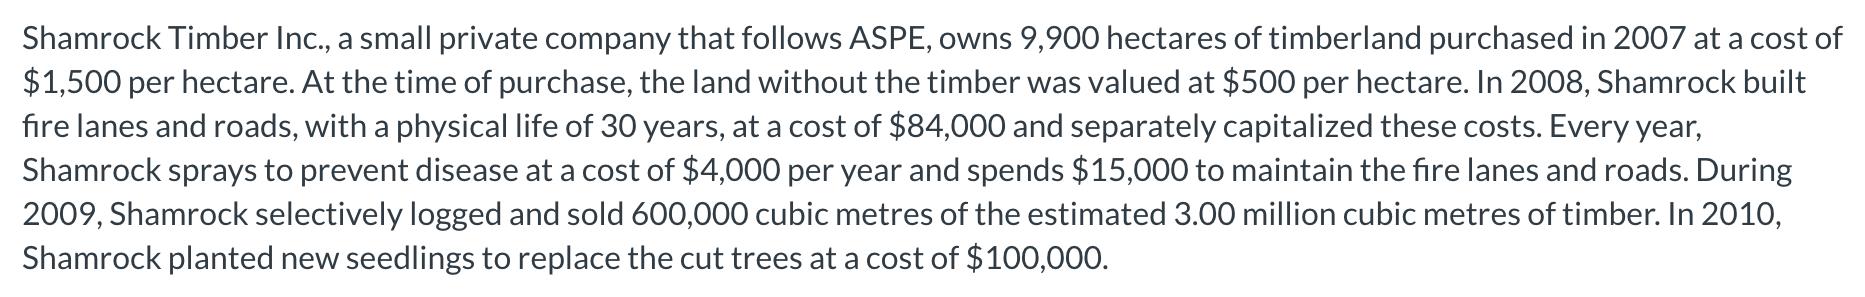 Shamrock Timber Inc., a small private company that follows ASPE, owns 9,900 hectares of timberland purchased in 2007 at a cos